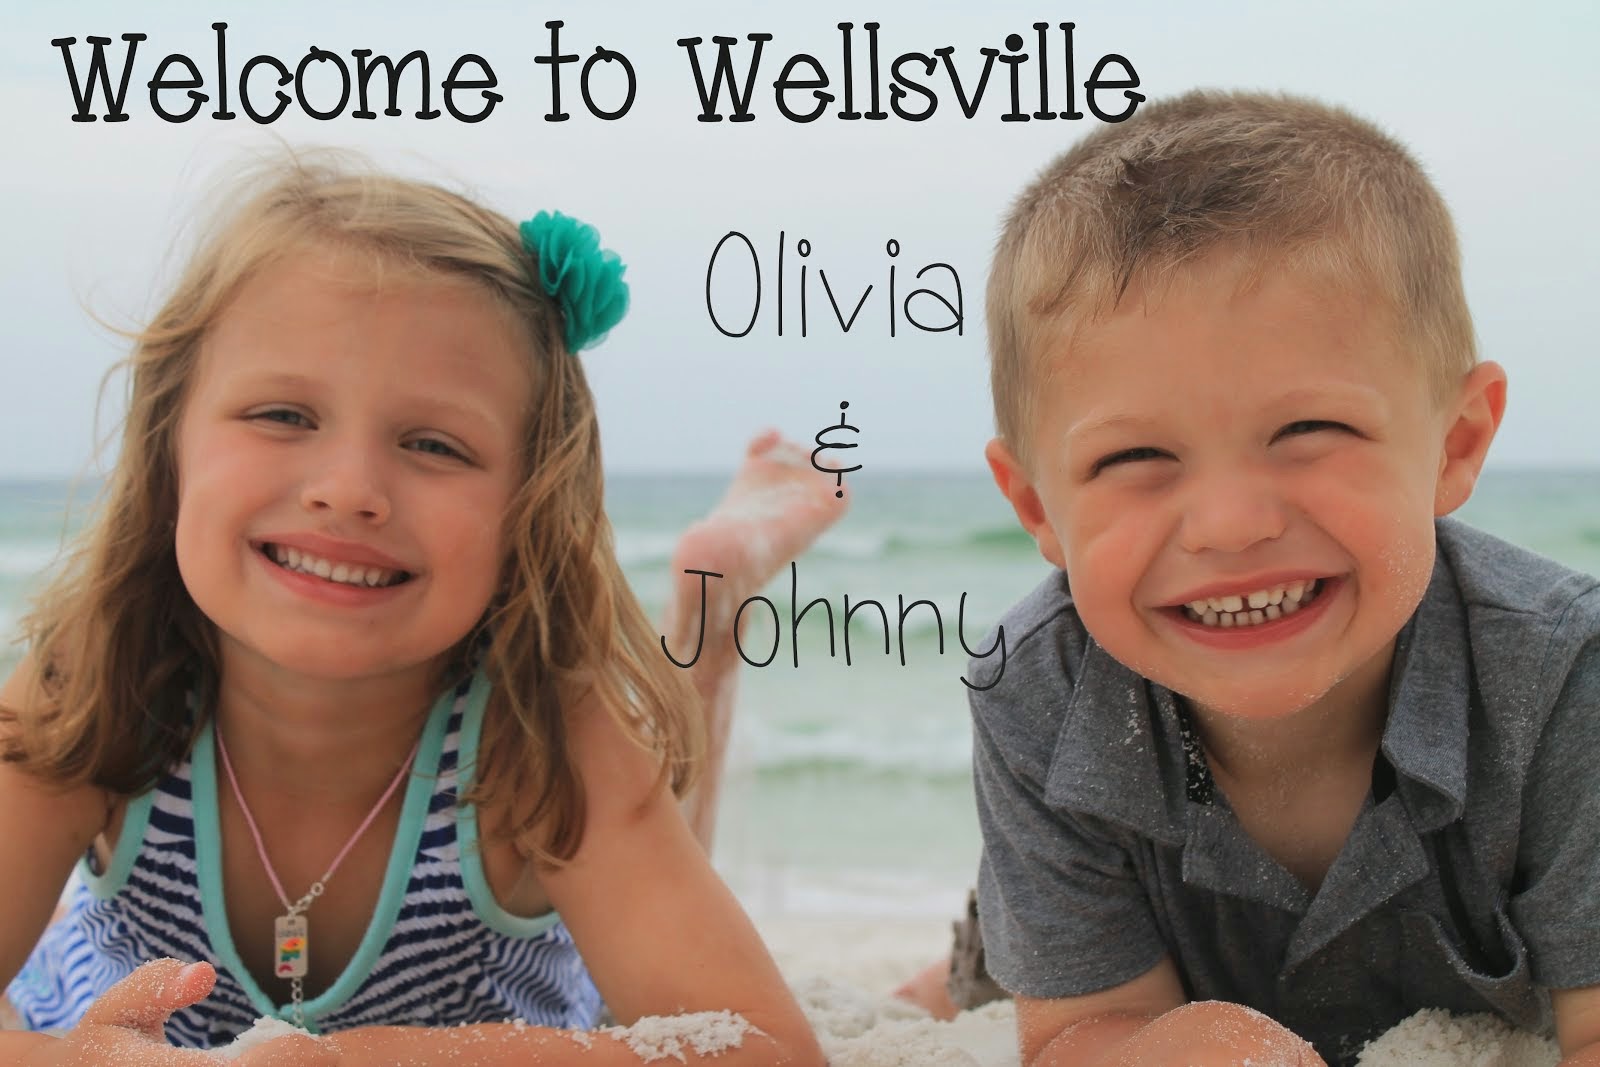 Welcome to Wellsville!